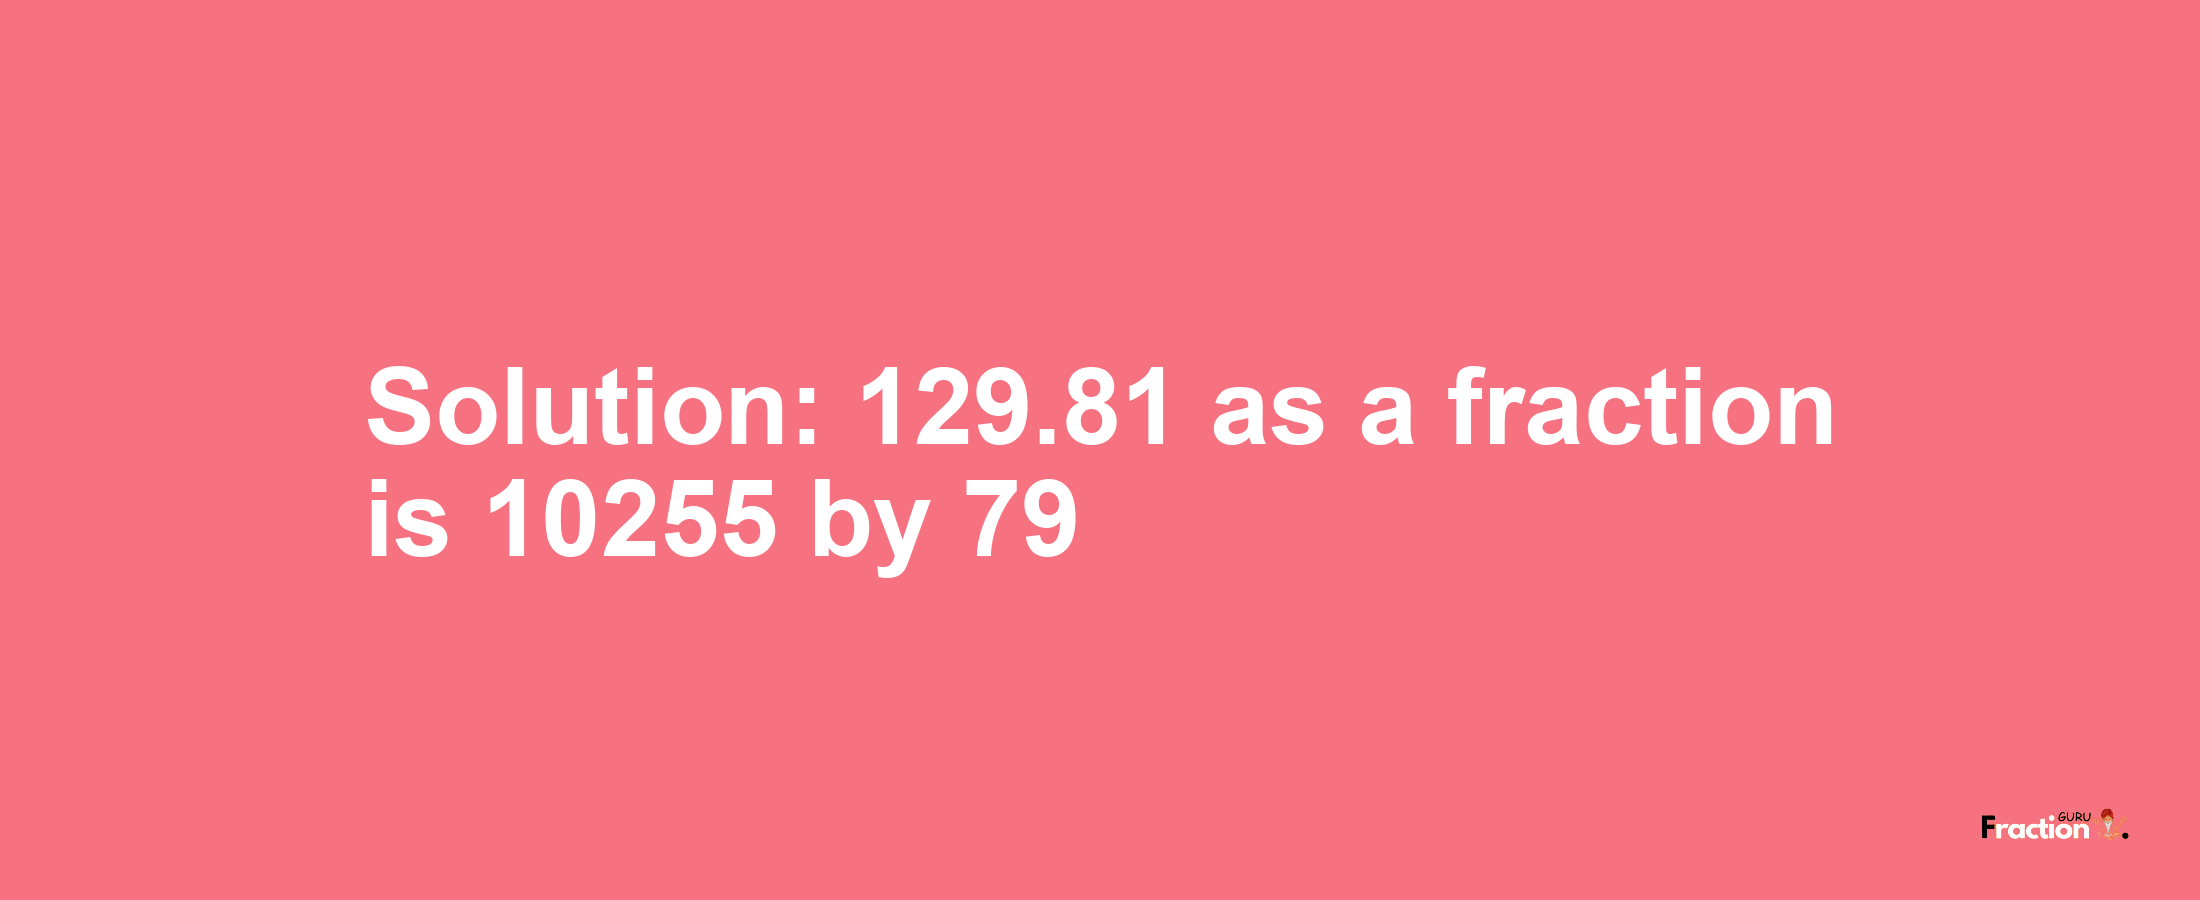 Solution:129.81 as a fraction is 10255/79